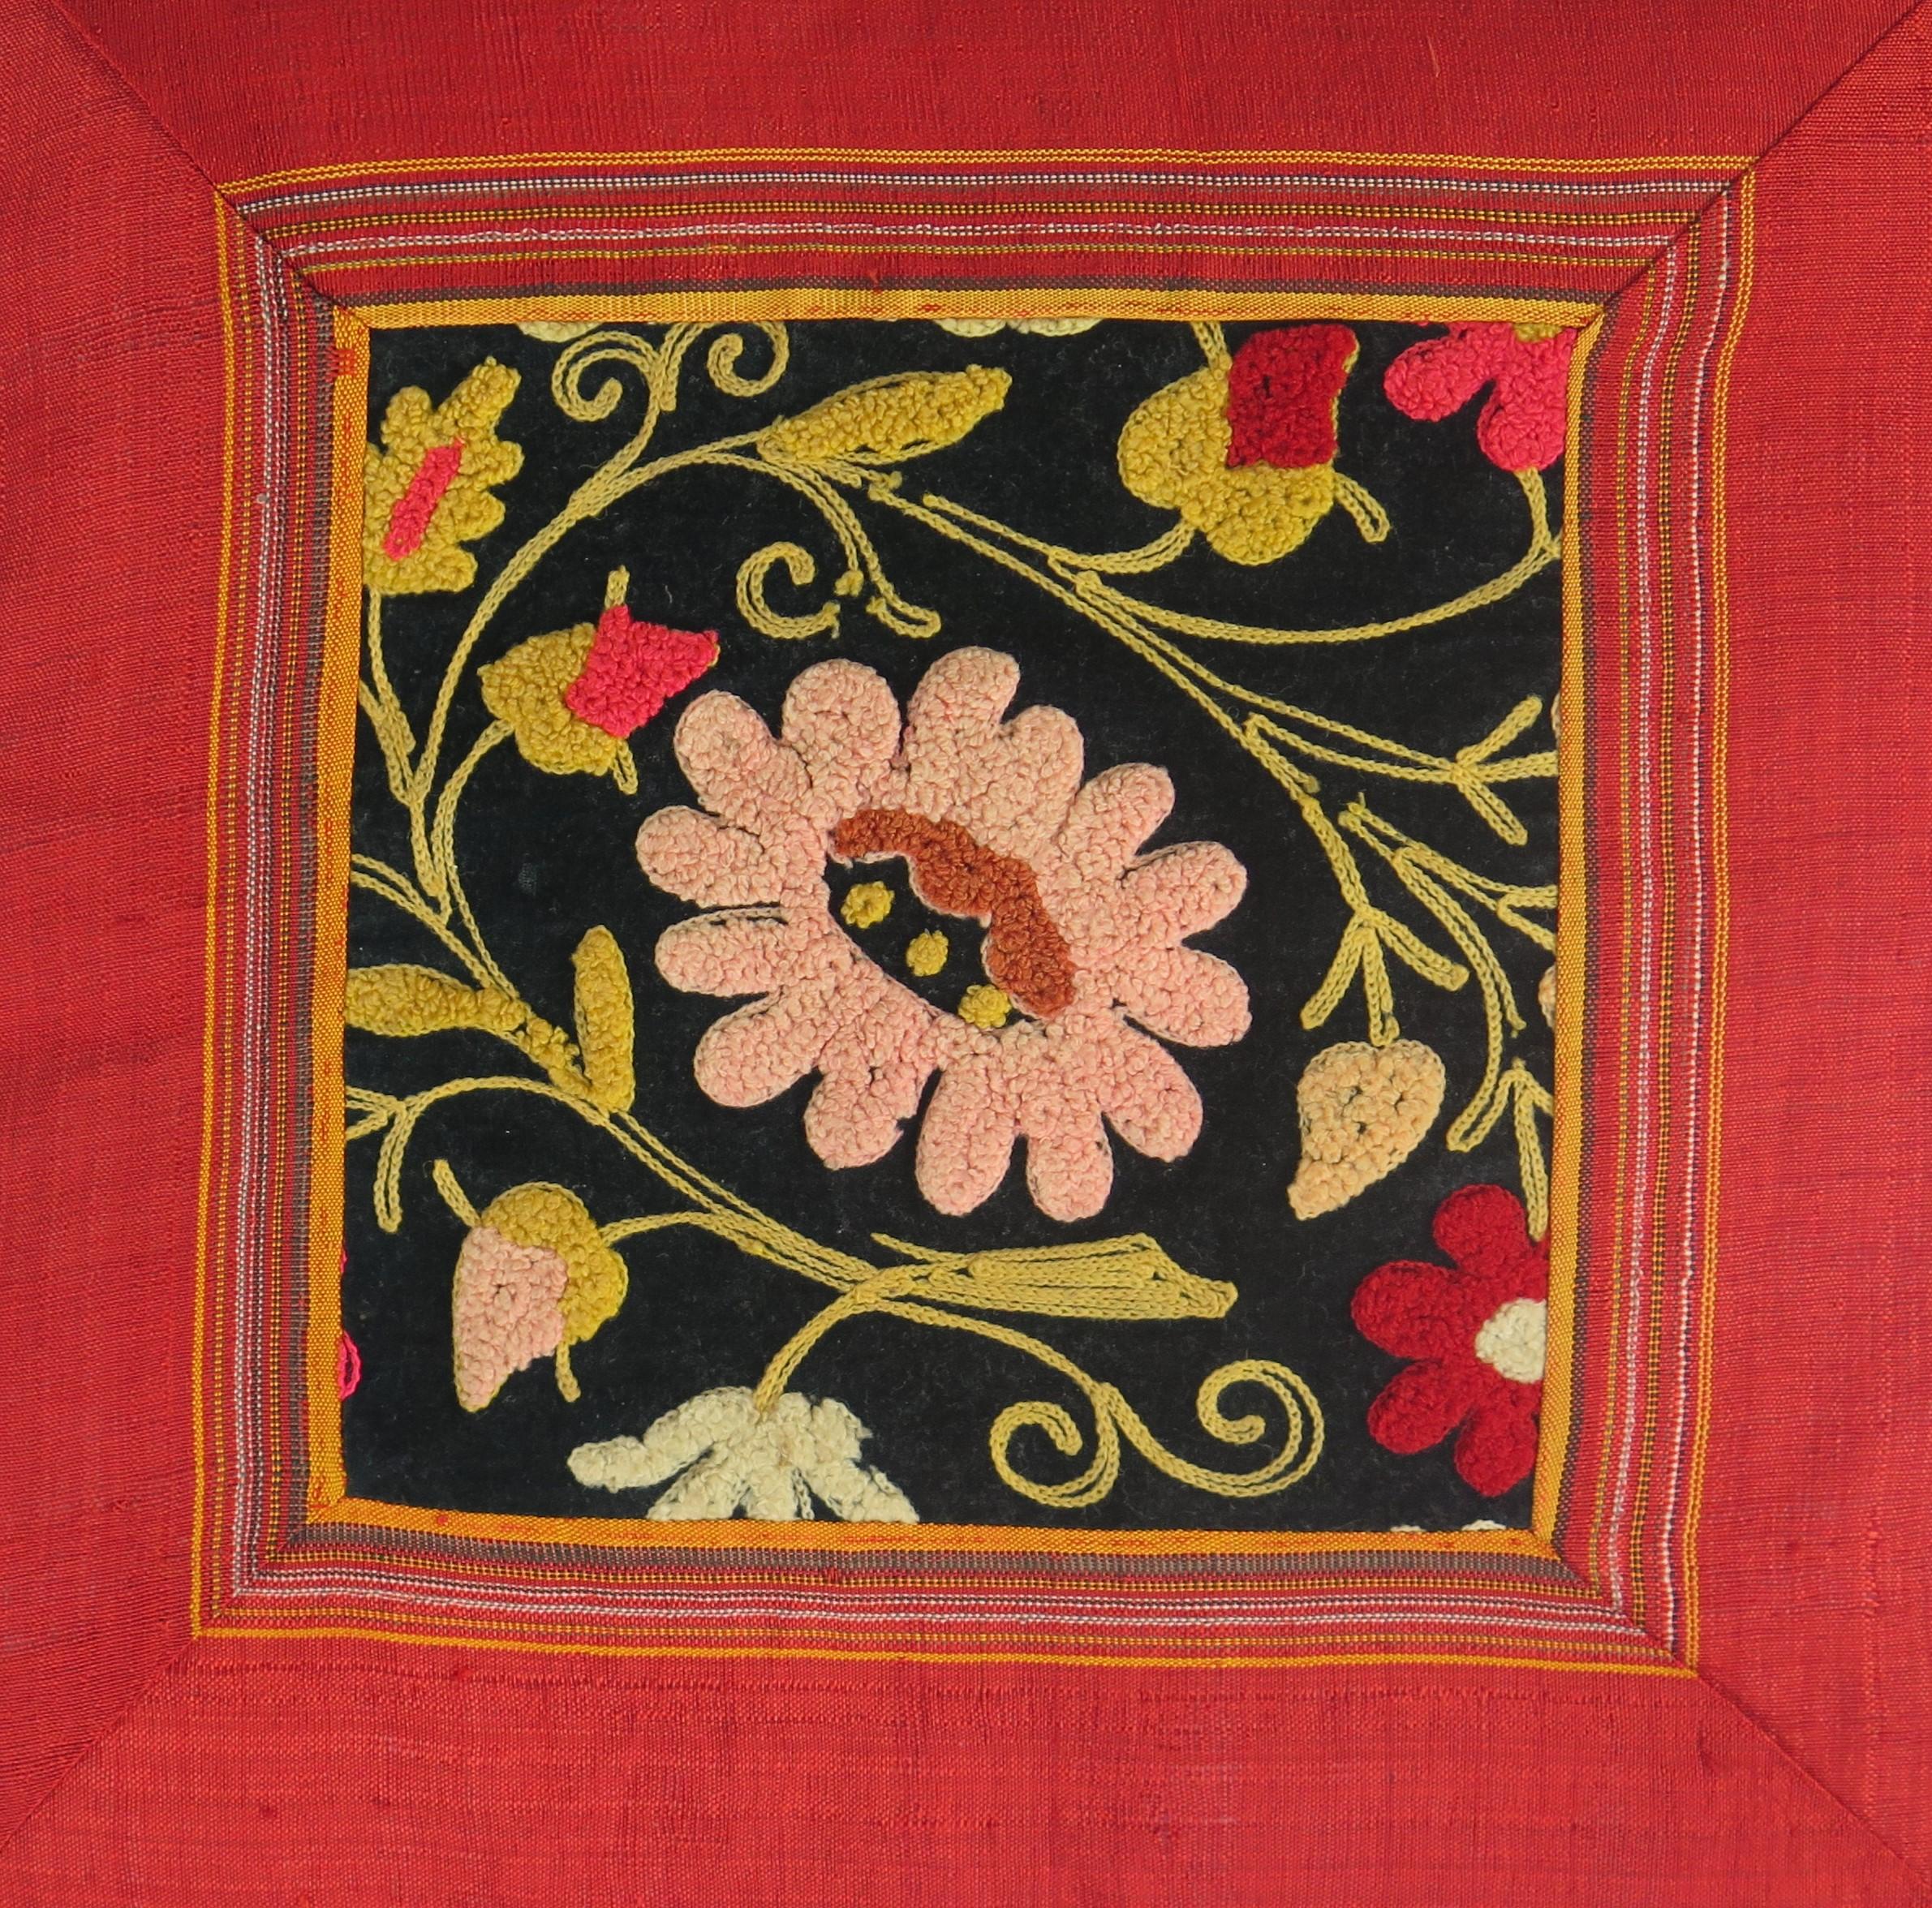 This is a very decorative cushion or pillow with a hand embroidered Art Nouveau wool-work floral panel with a red silk border, all set into a red fabric which we date to the late 19th Century / early 20th Century,  circa 1900.

The pillow is about